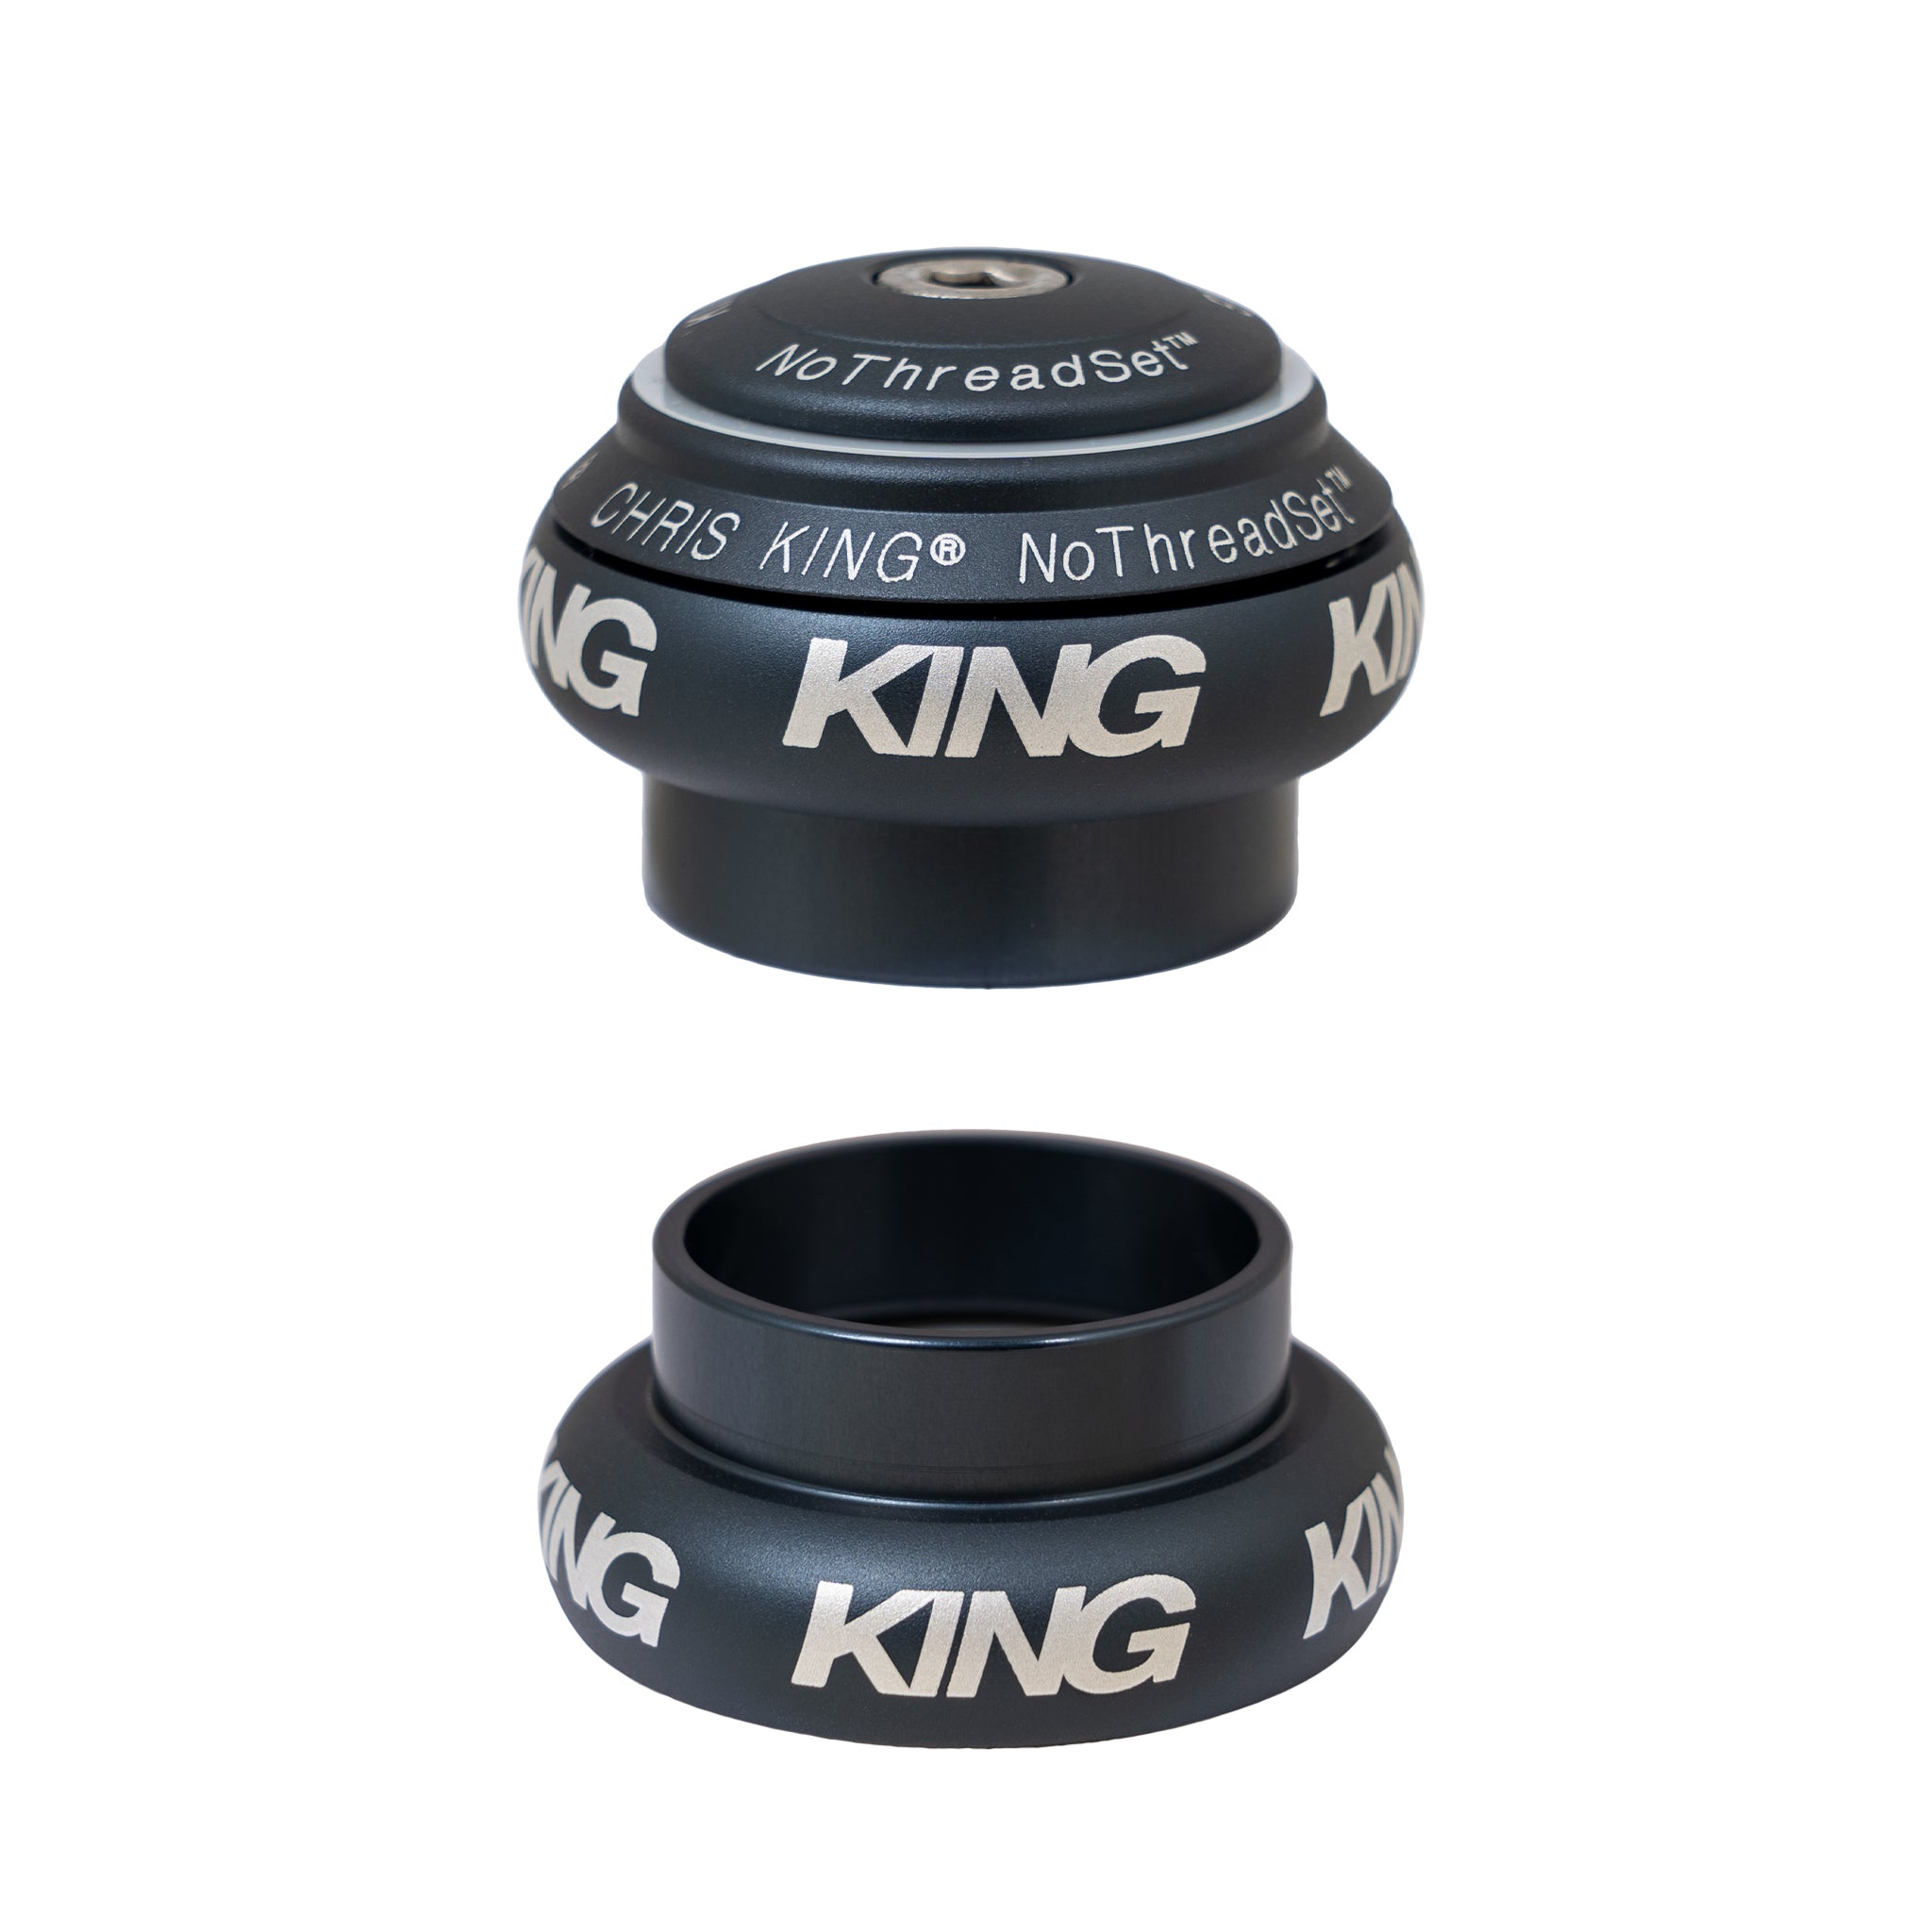 Chris King NoThreadSet™ Headset – Chris King Precision Components